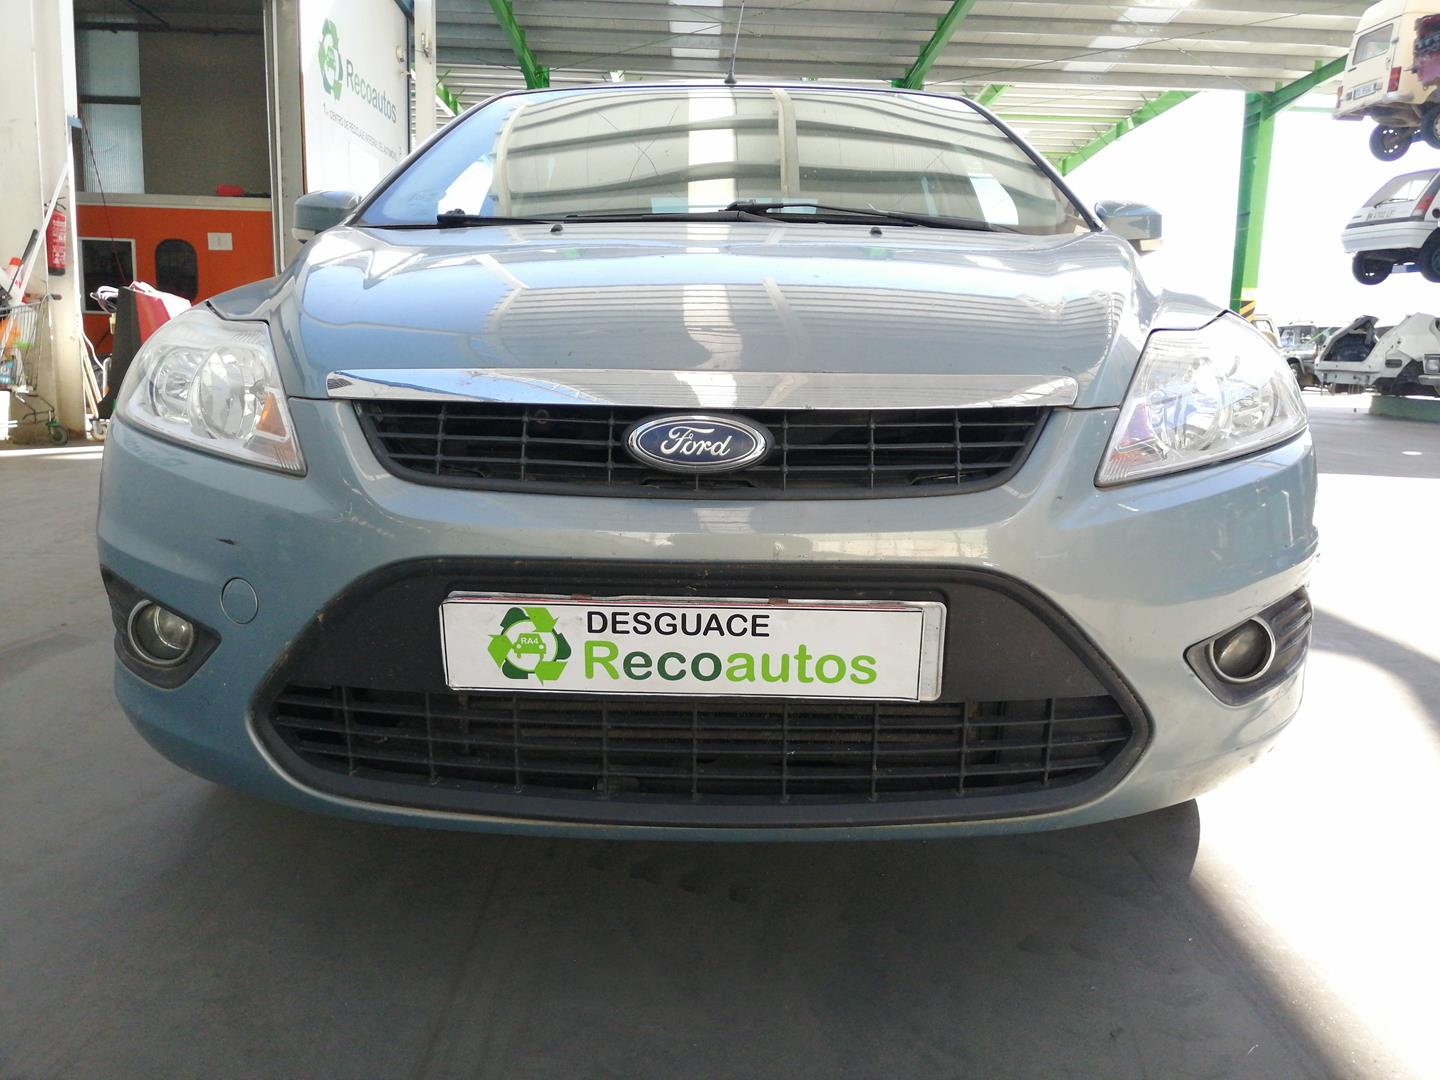 FORD Focus 2 generation (2004-2011) ABS blokas 8M512C405AA, 10020603224, ATE 21728103